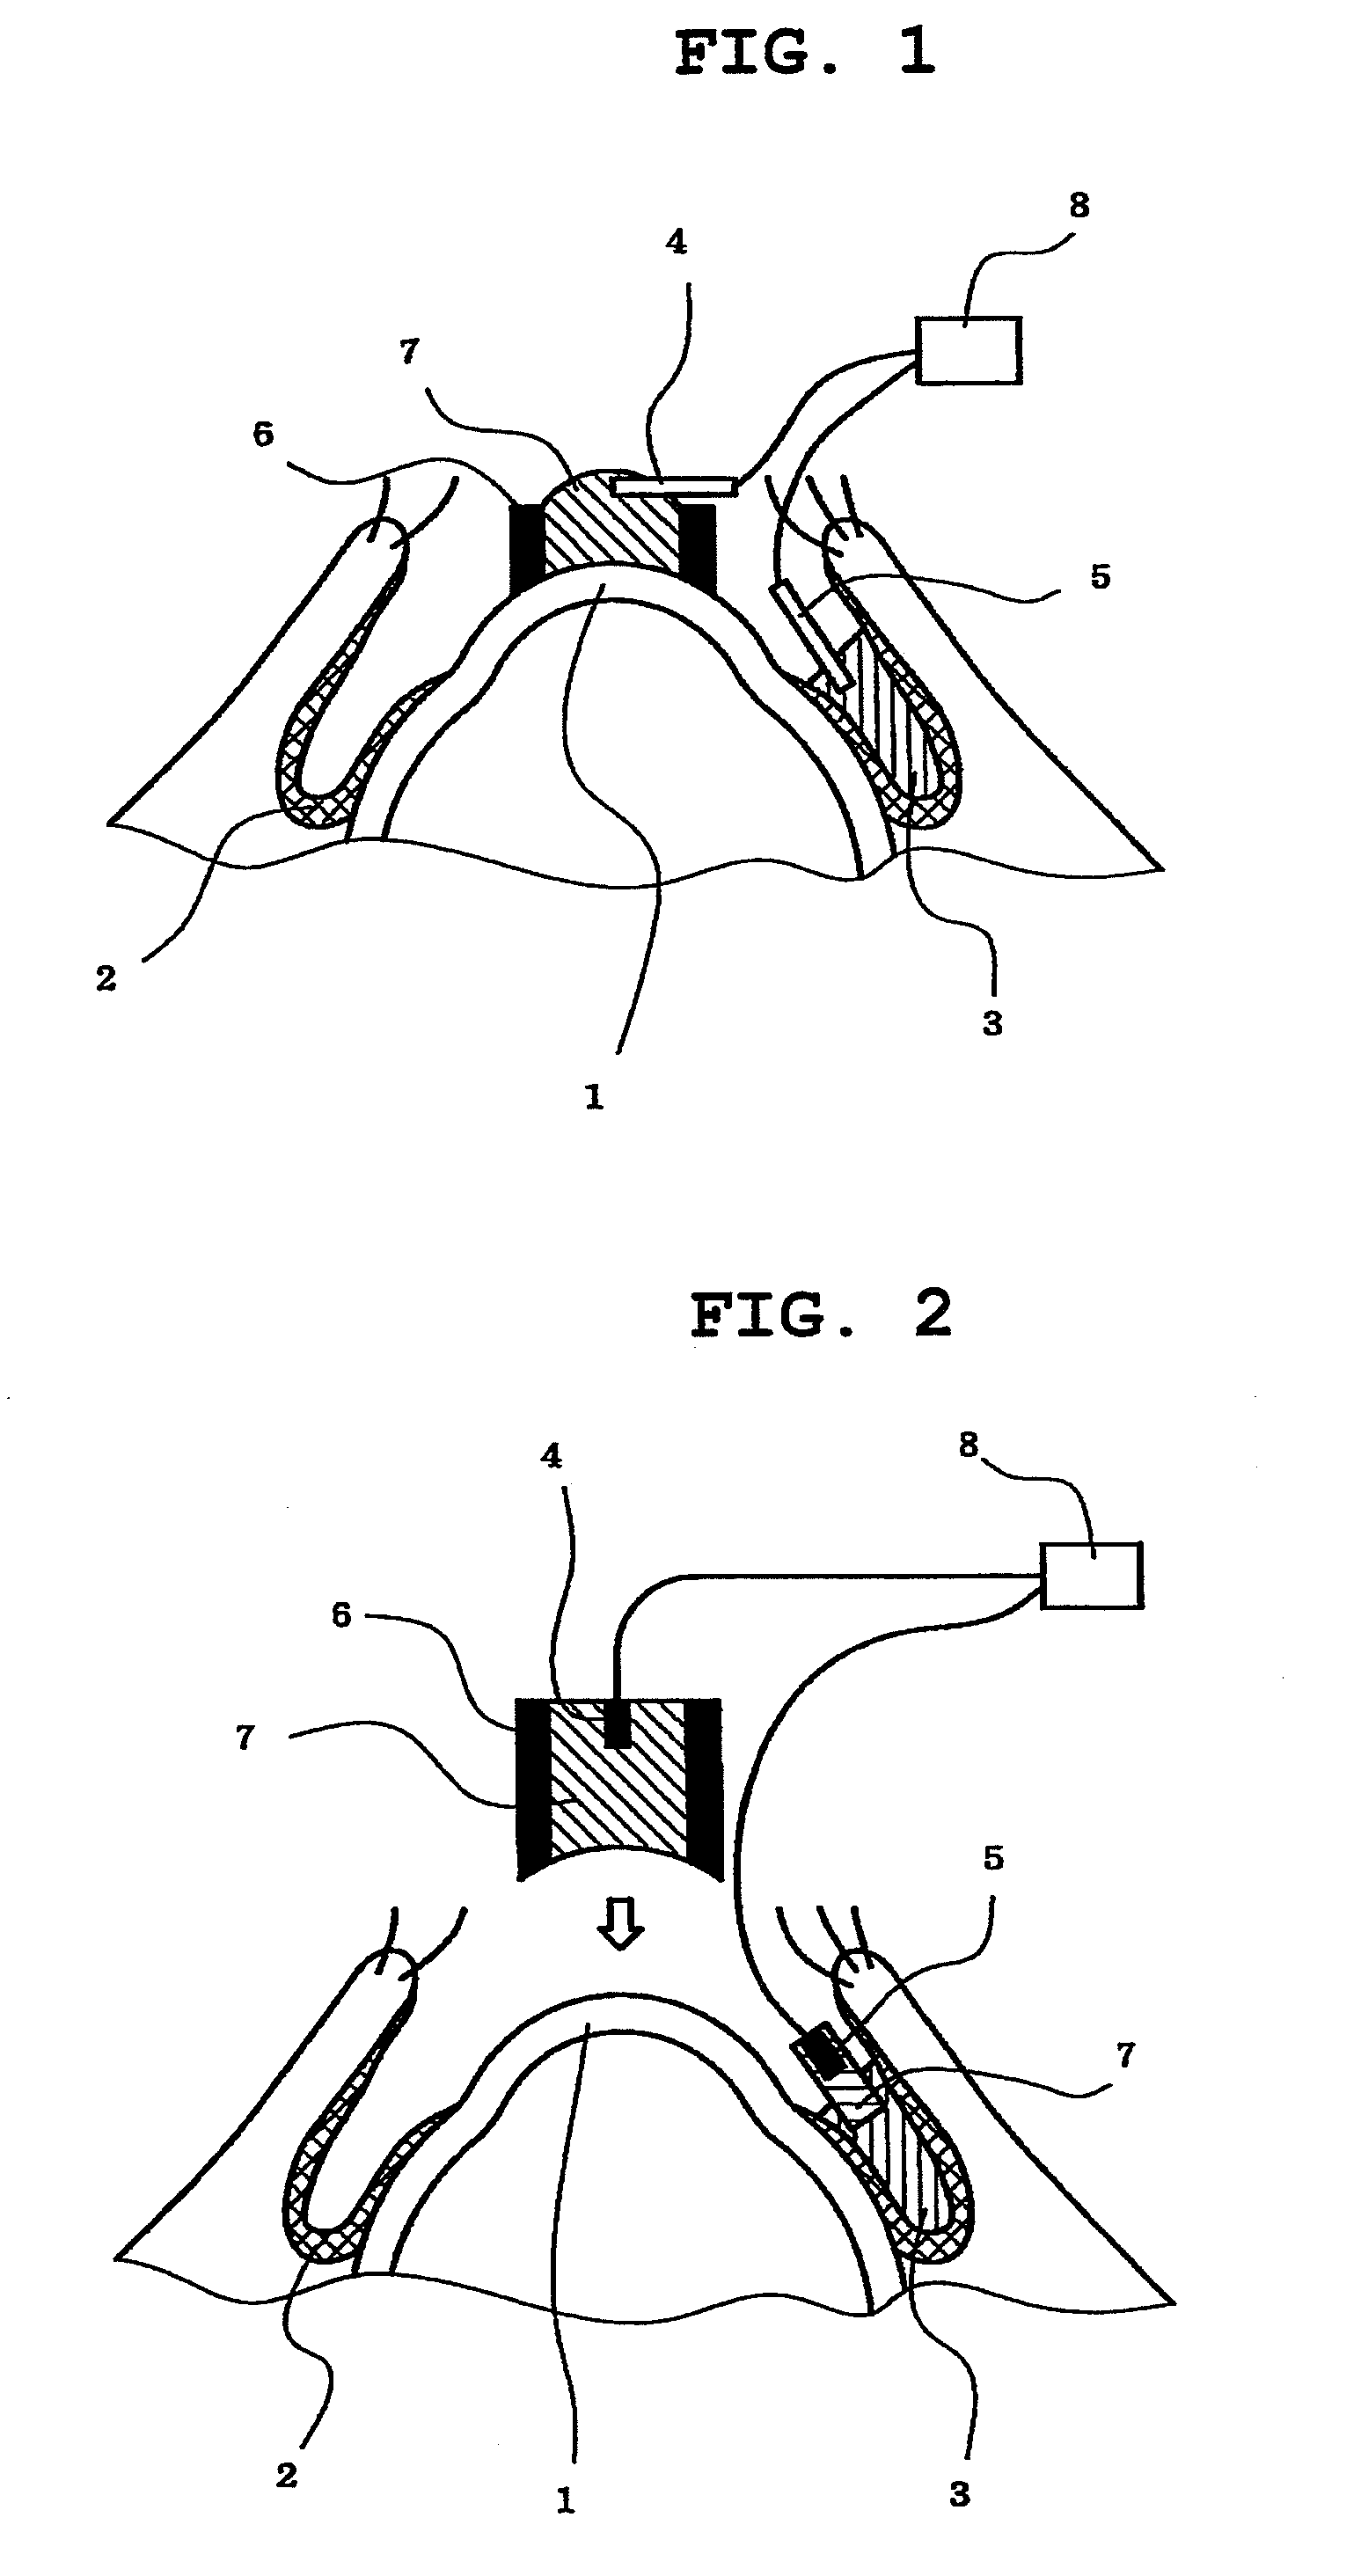 Method of measuring electrical resistance value of corneal trans-epithelium